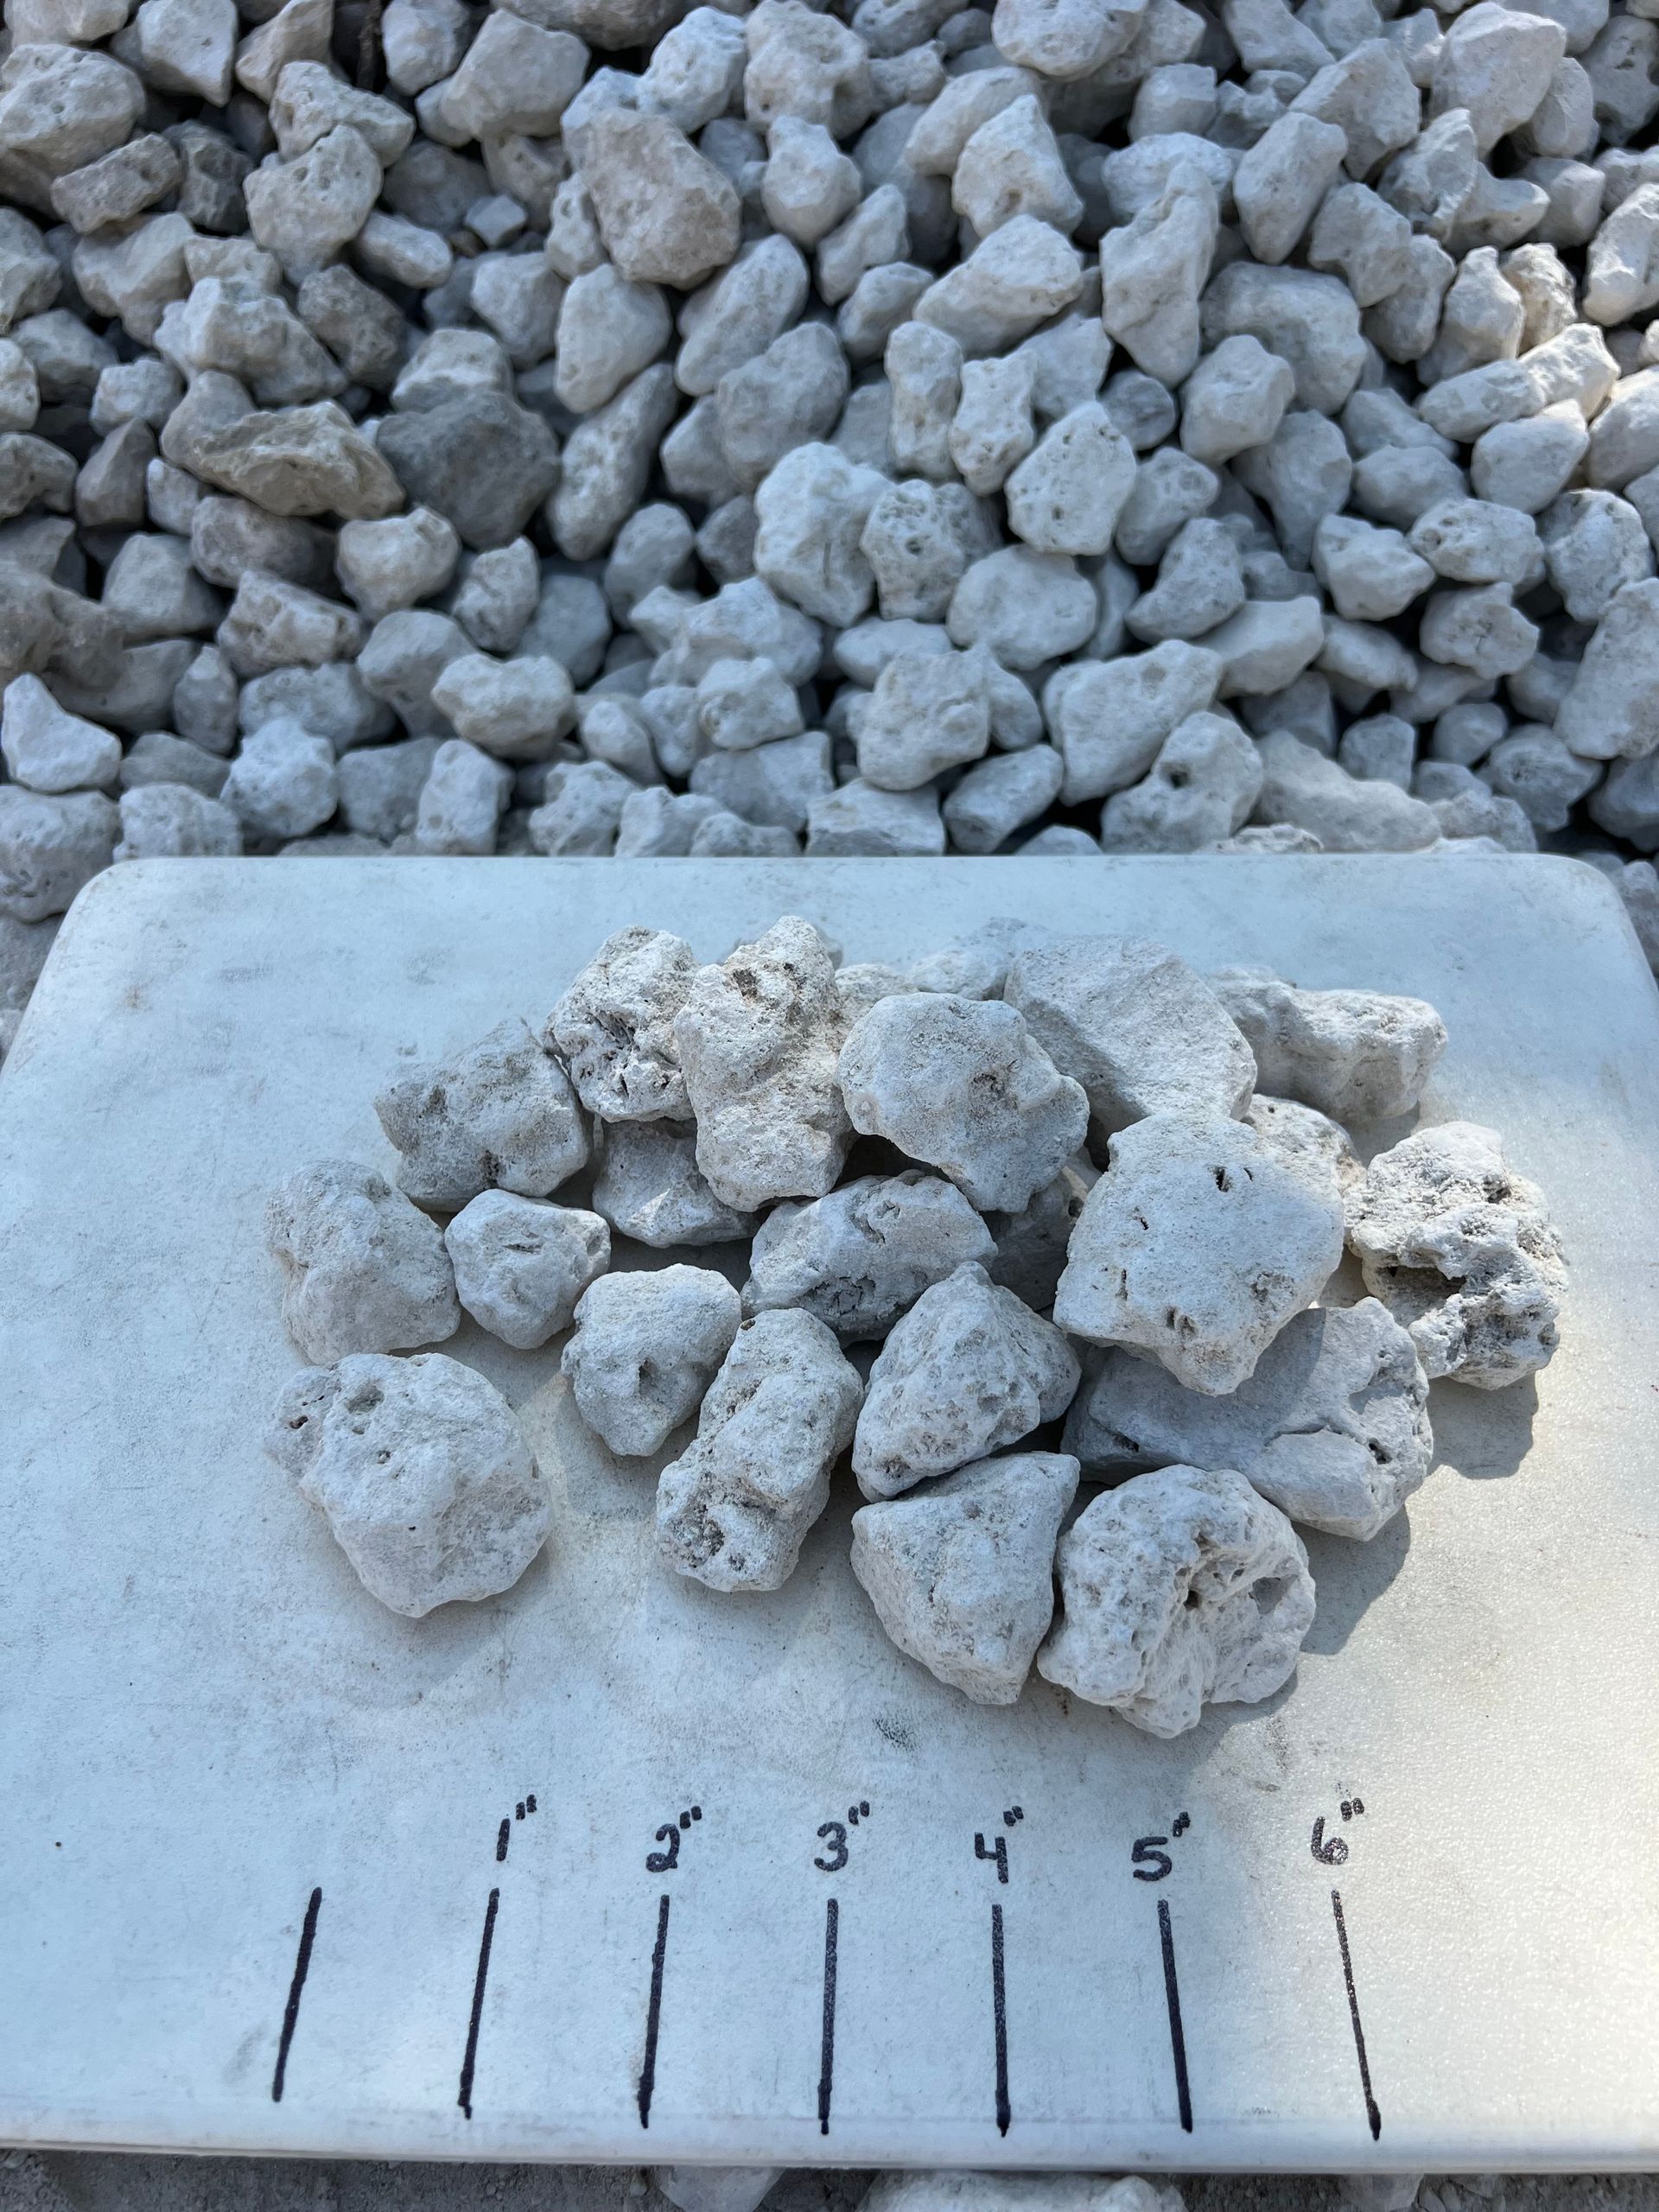 A pile of #4 Limestone sits next to a pile of smaller rocks